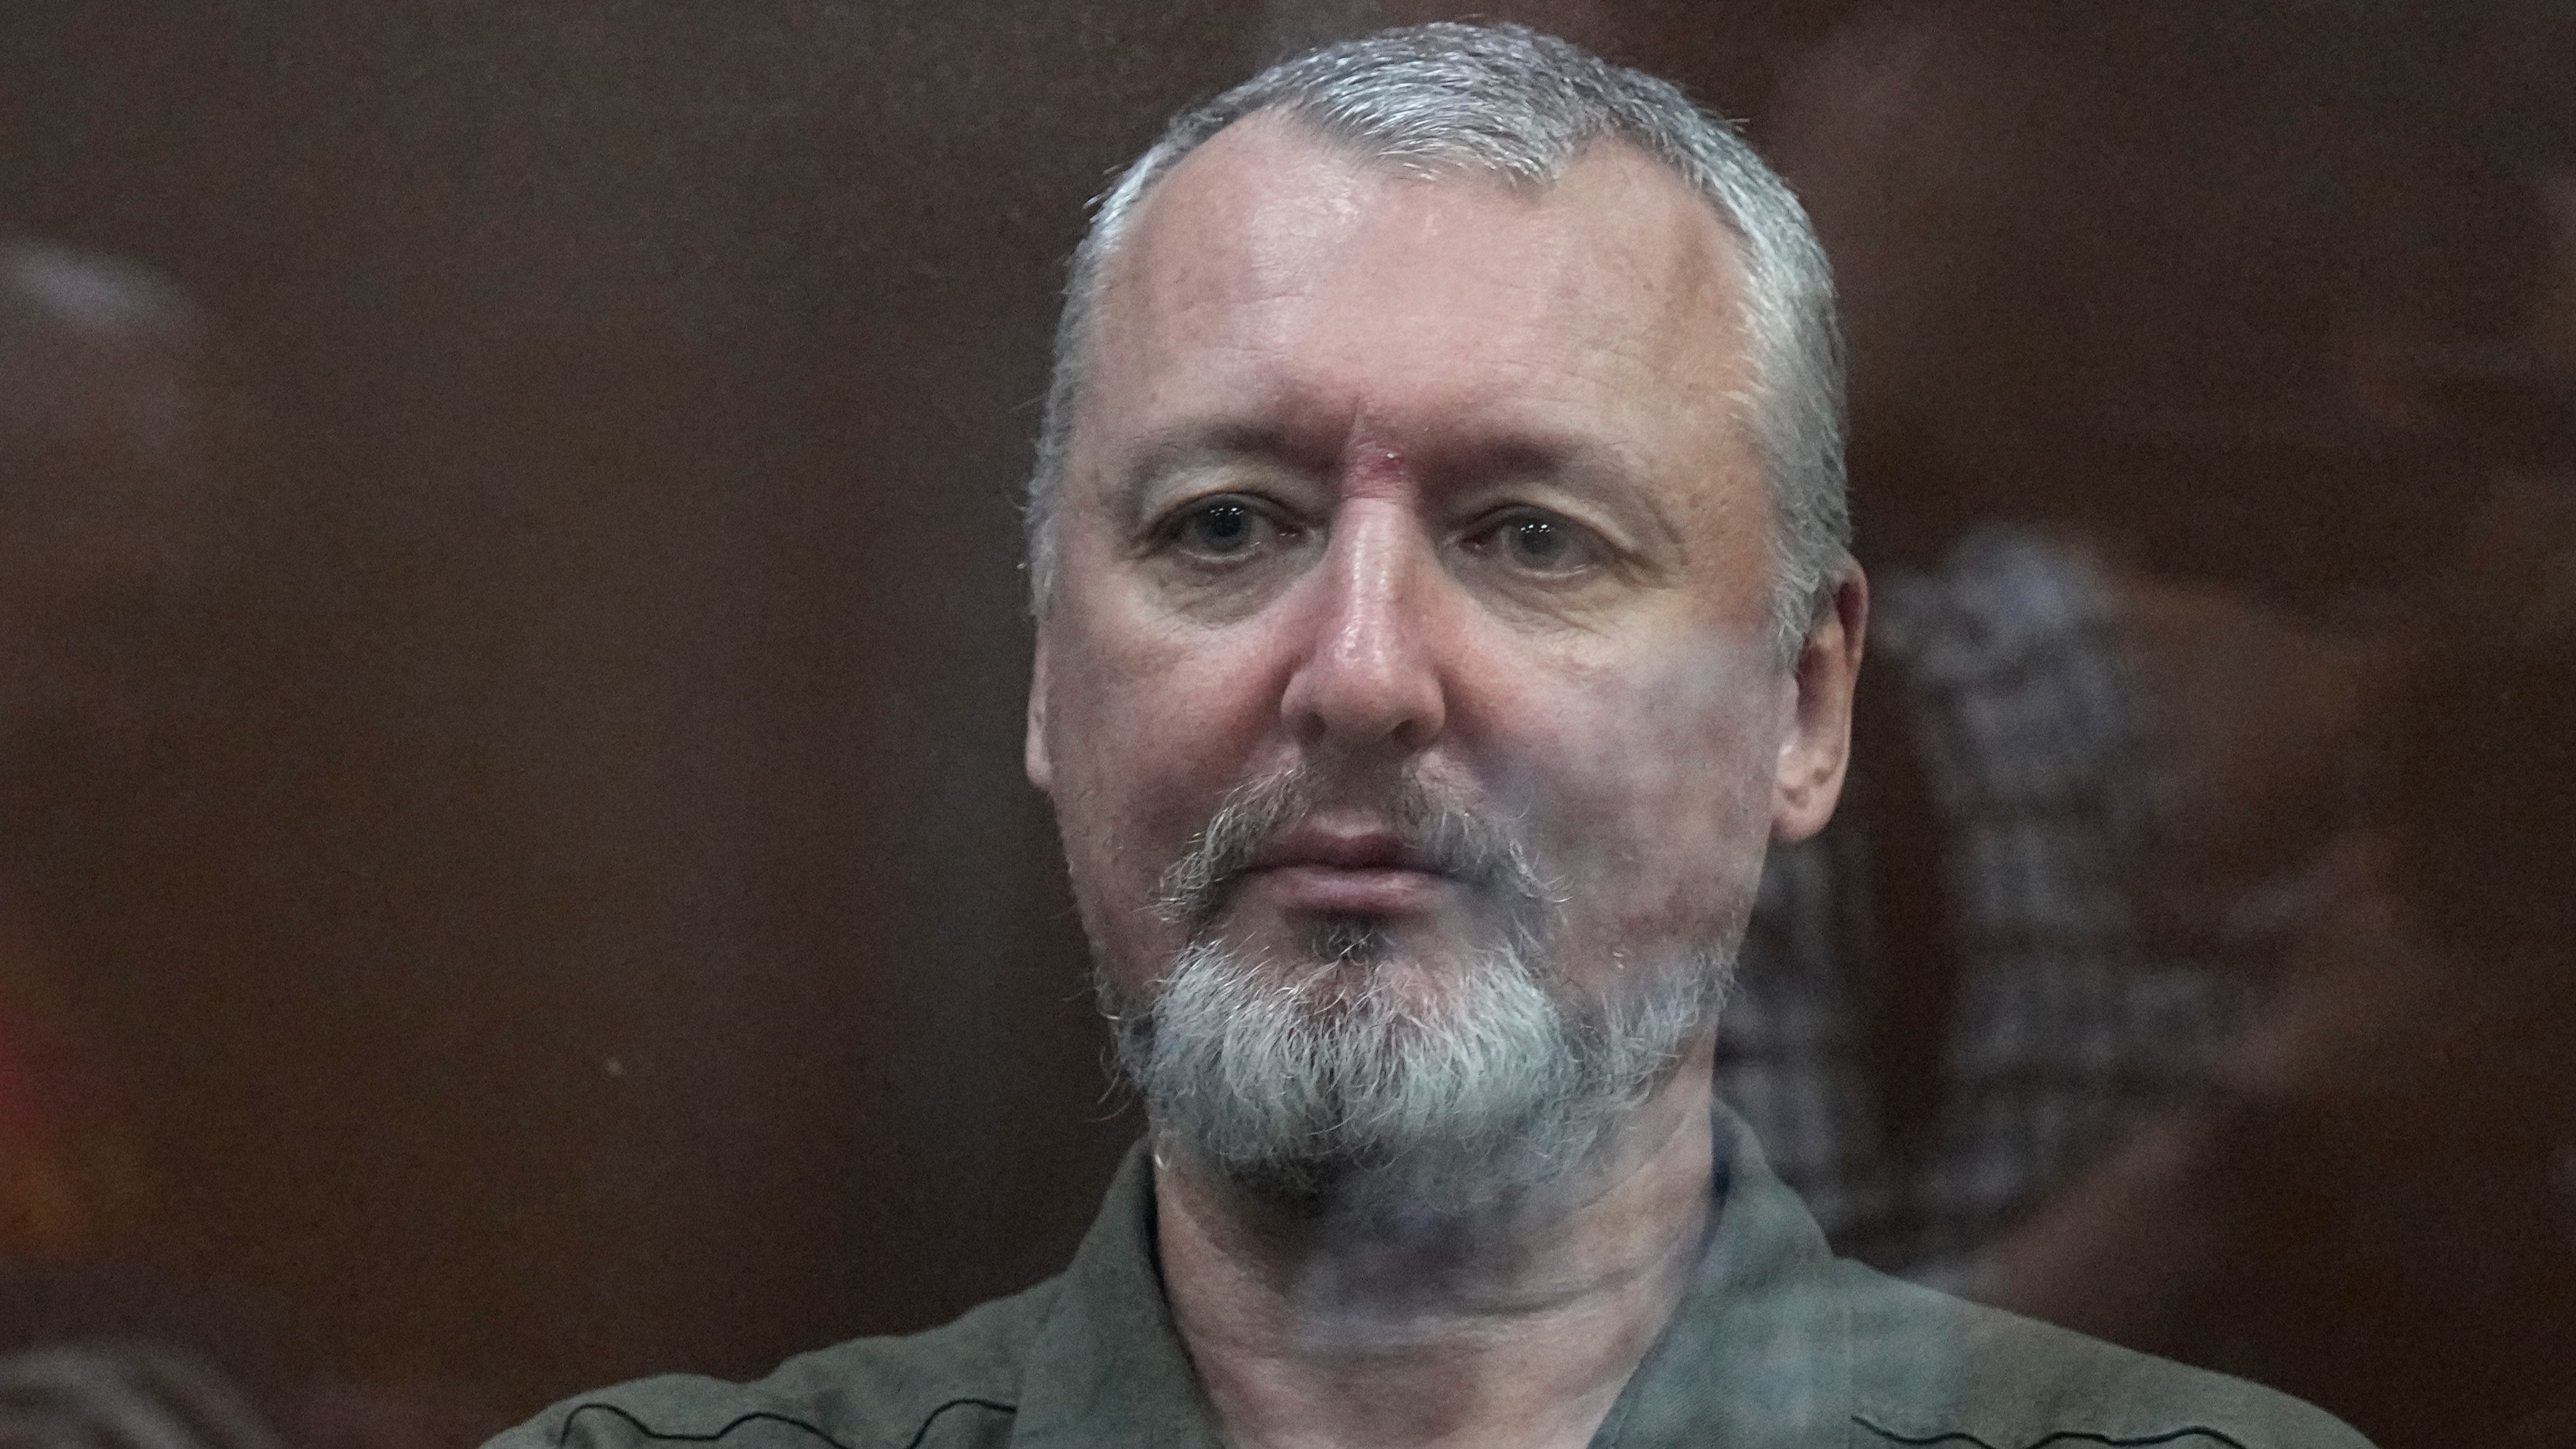 Igor Girkin Russian hardliner convicted over MH17 crash arrested after accusing Putin of weakness ITV News photo